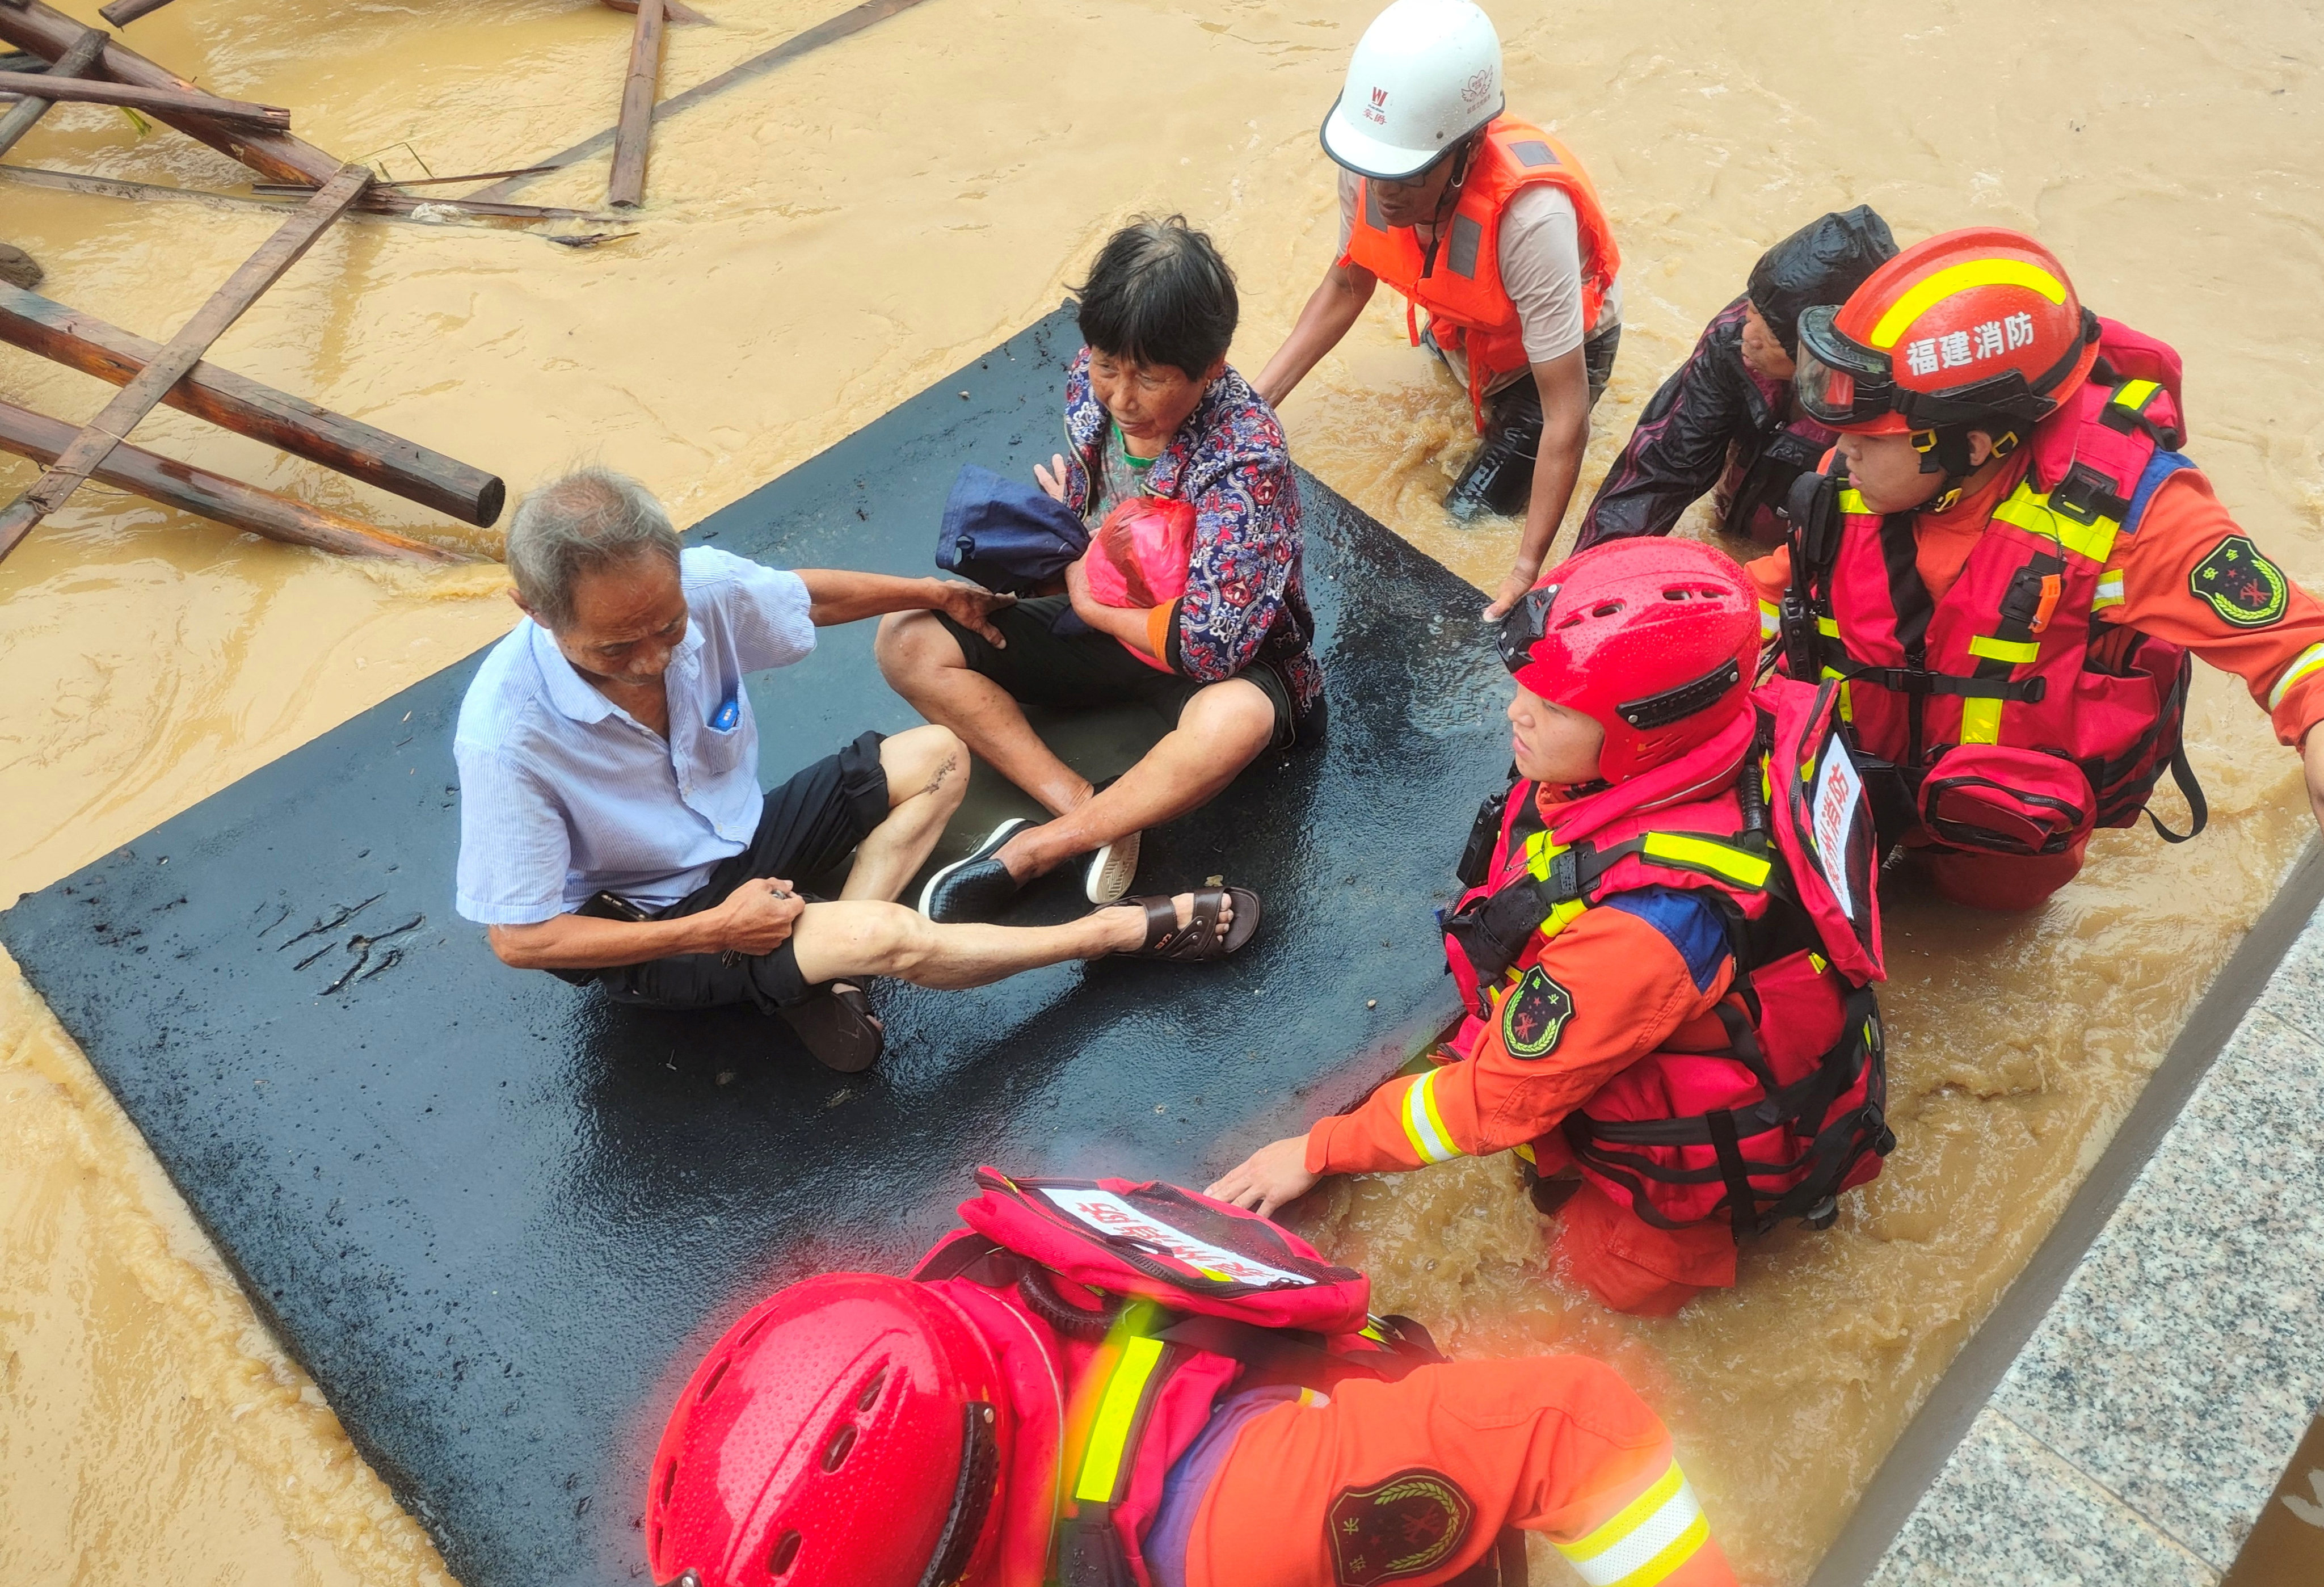 Firefighters evacuate residents after Typhoon Doksuri causes flooding in China’s Fujian province on Friday. Photo: cnsphoto via Reuters